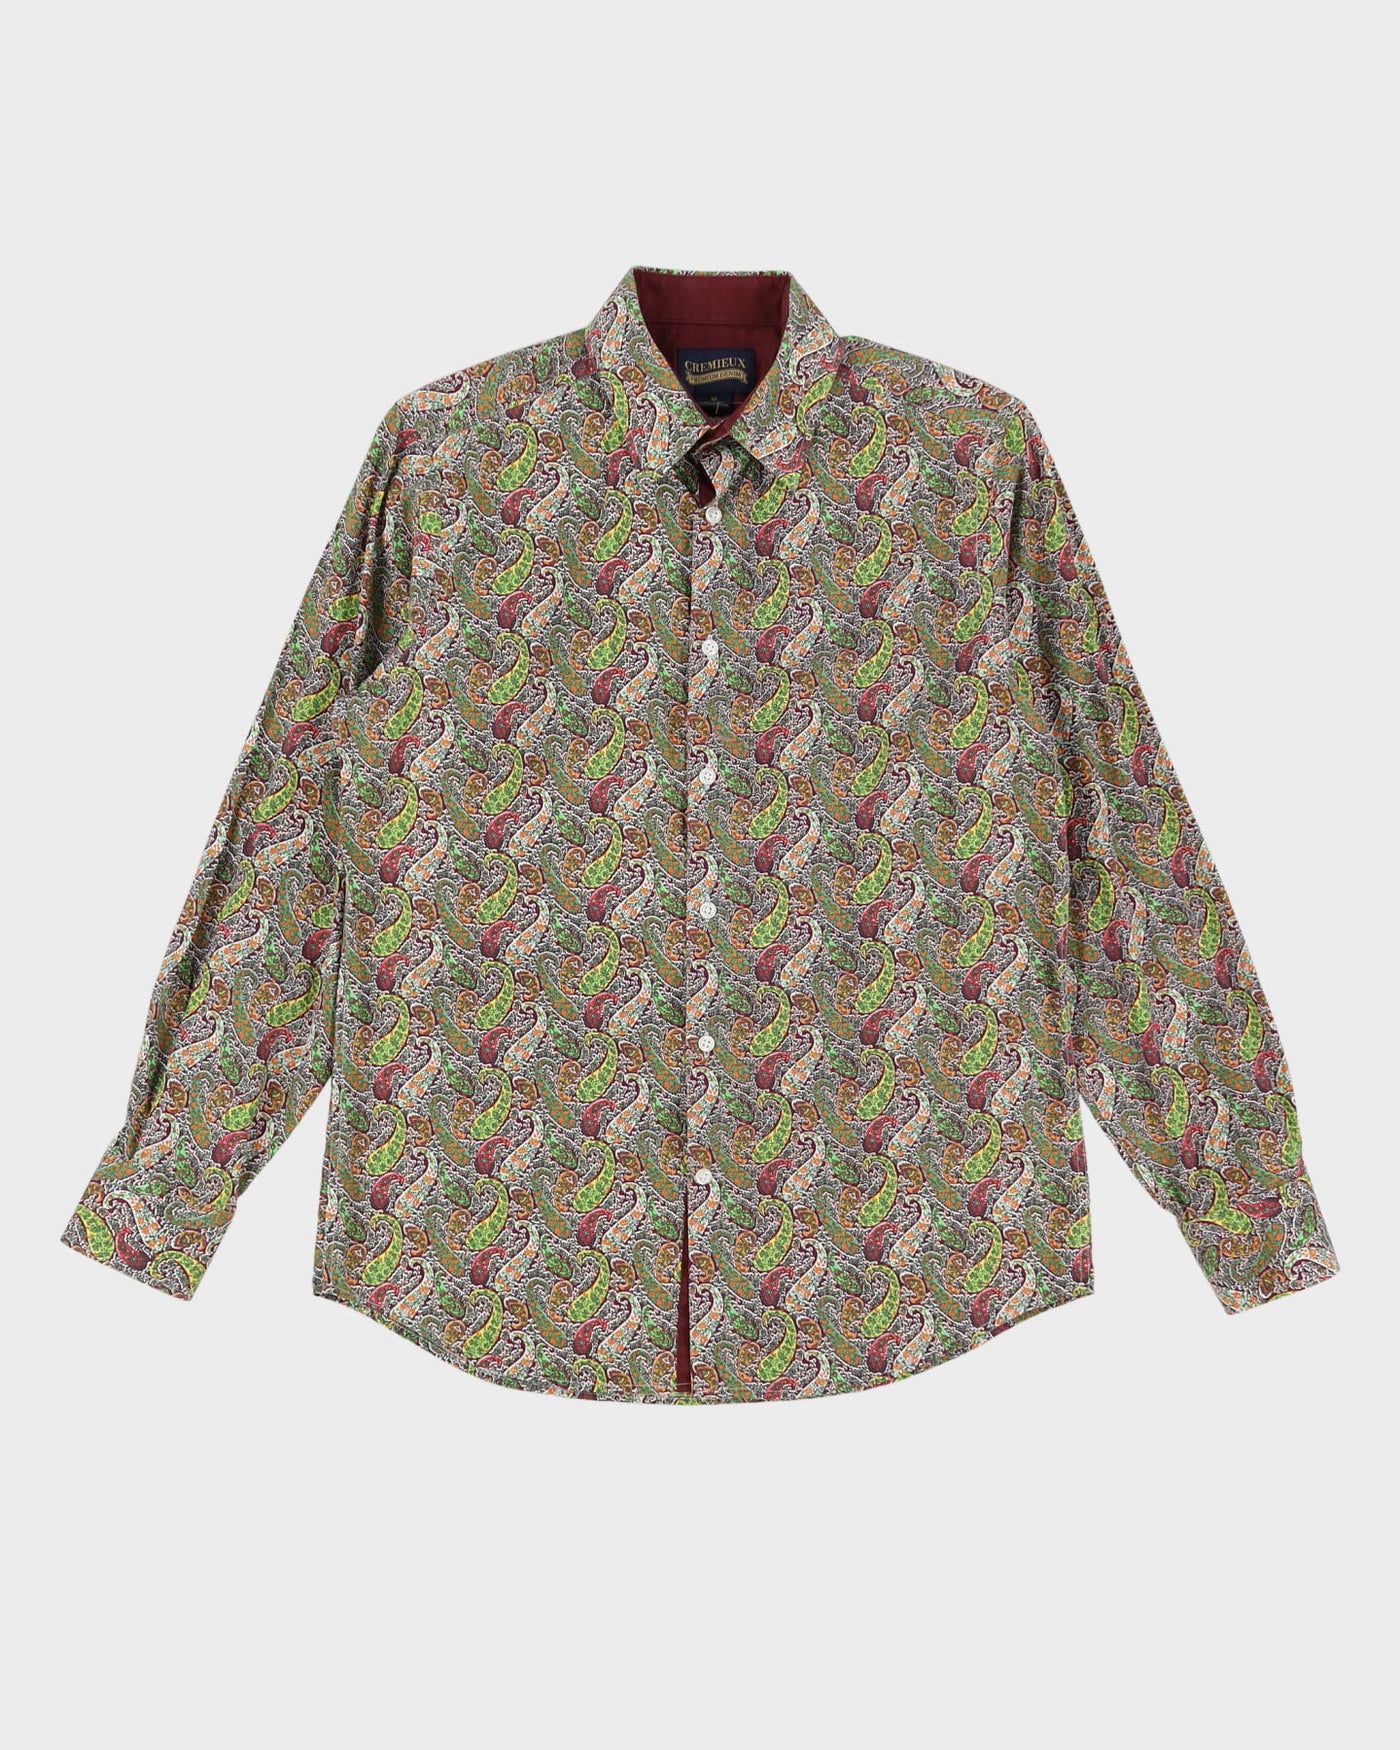 Burgundy And Green Paisley Patterned Shirt - M